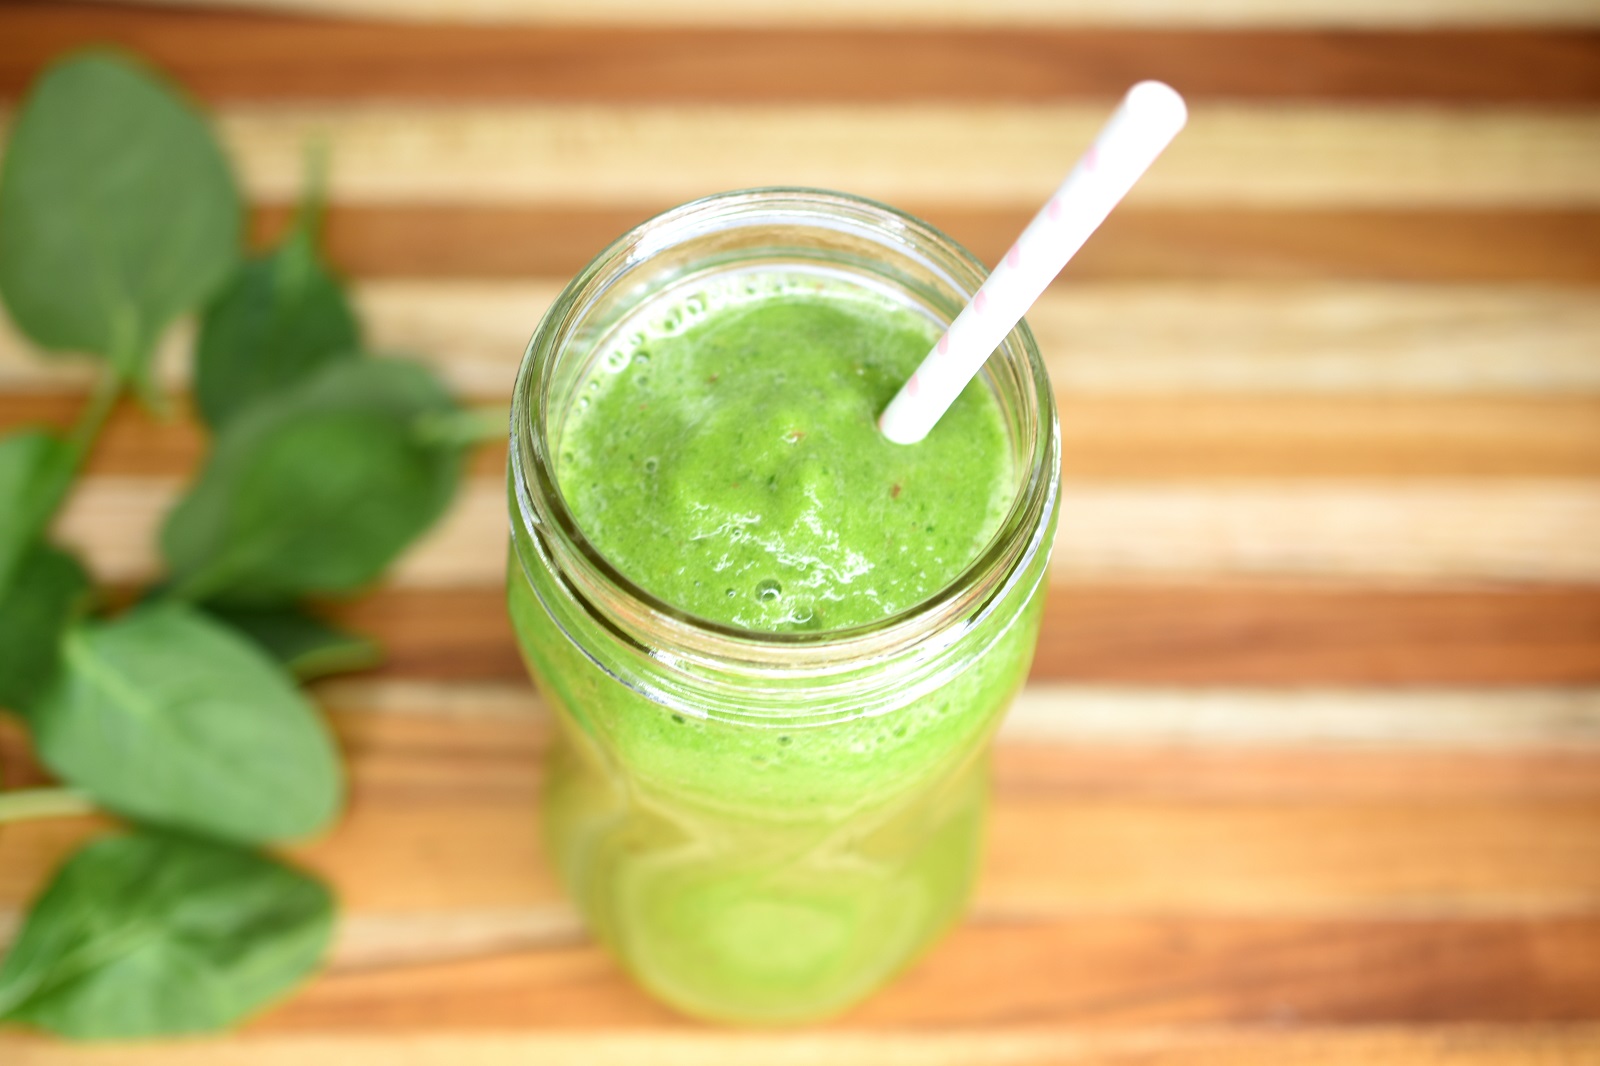 Favorite 4 Ingredient Green Smoothie recipe. Make in minutes and so refreshing and good for you too!